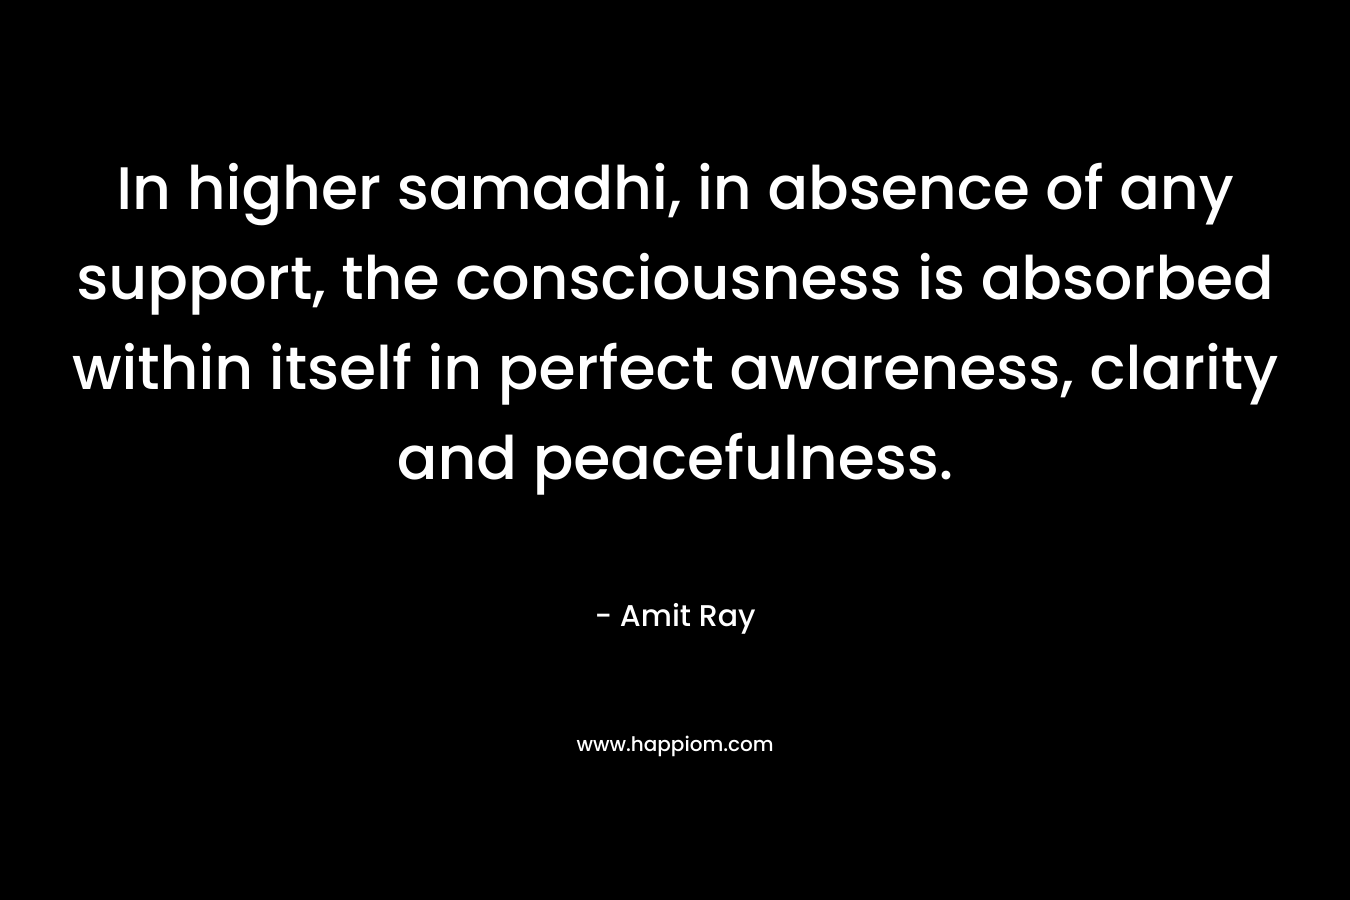 In higher samadhi, in absence of any support, the consciousness is absorbed within itself in perfect awareness, clarity and peacefulness.